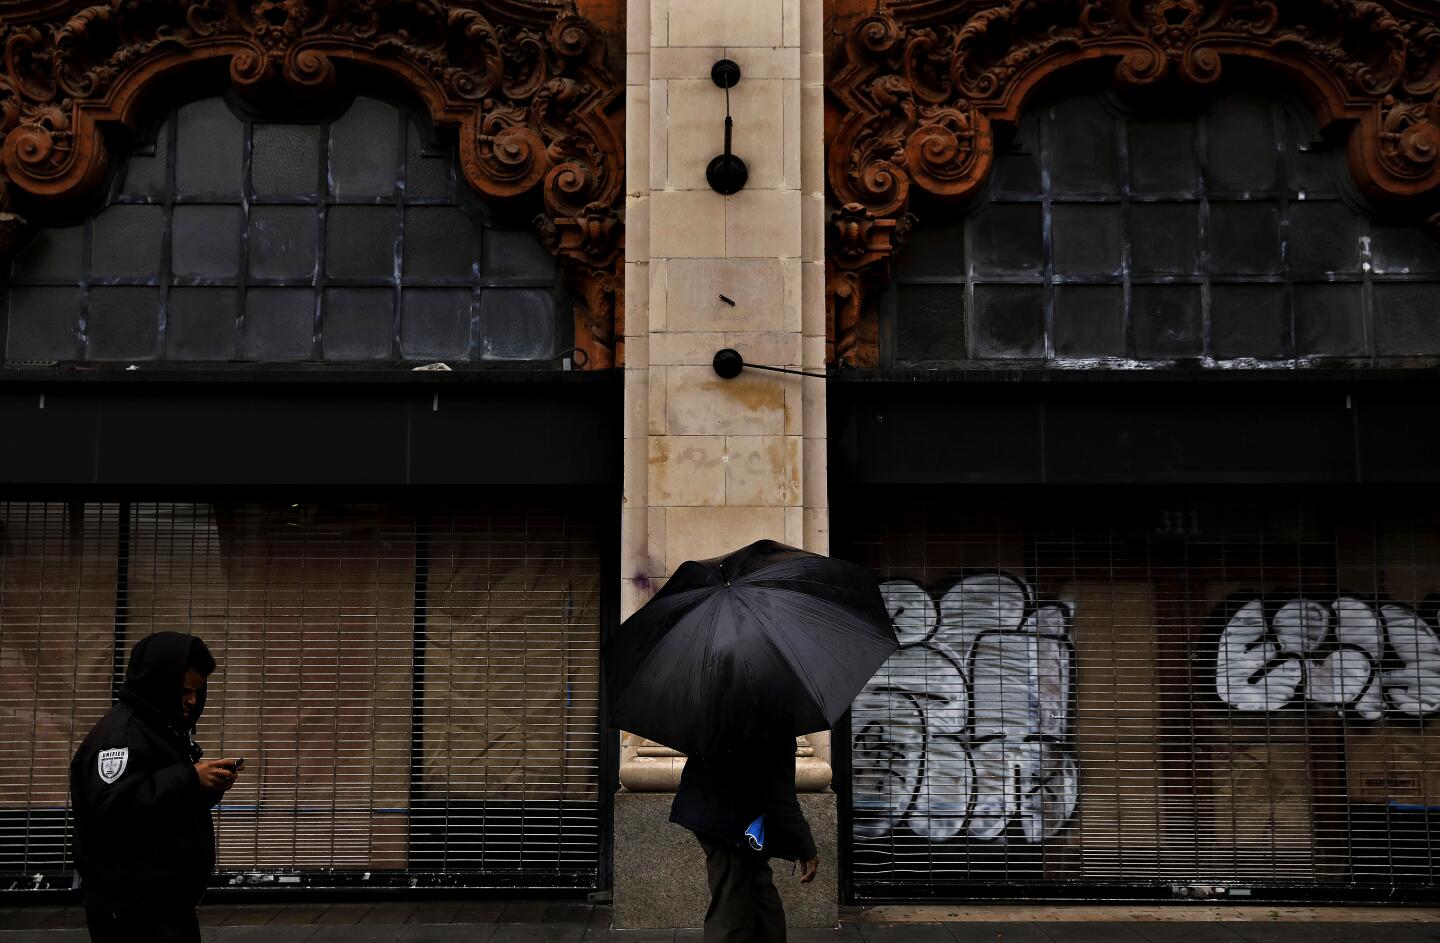 Pedestrians shield themselves from the rain in downtown Los Angeles.